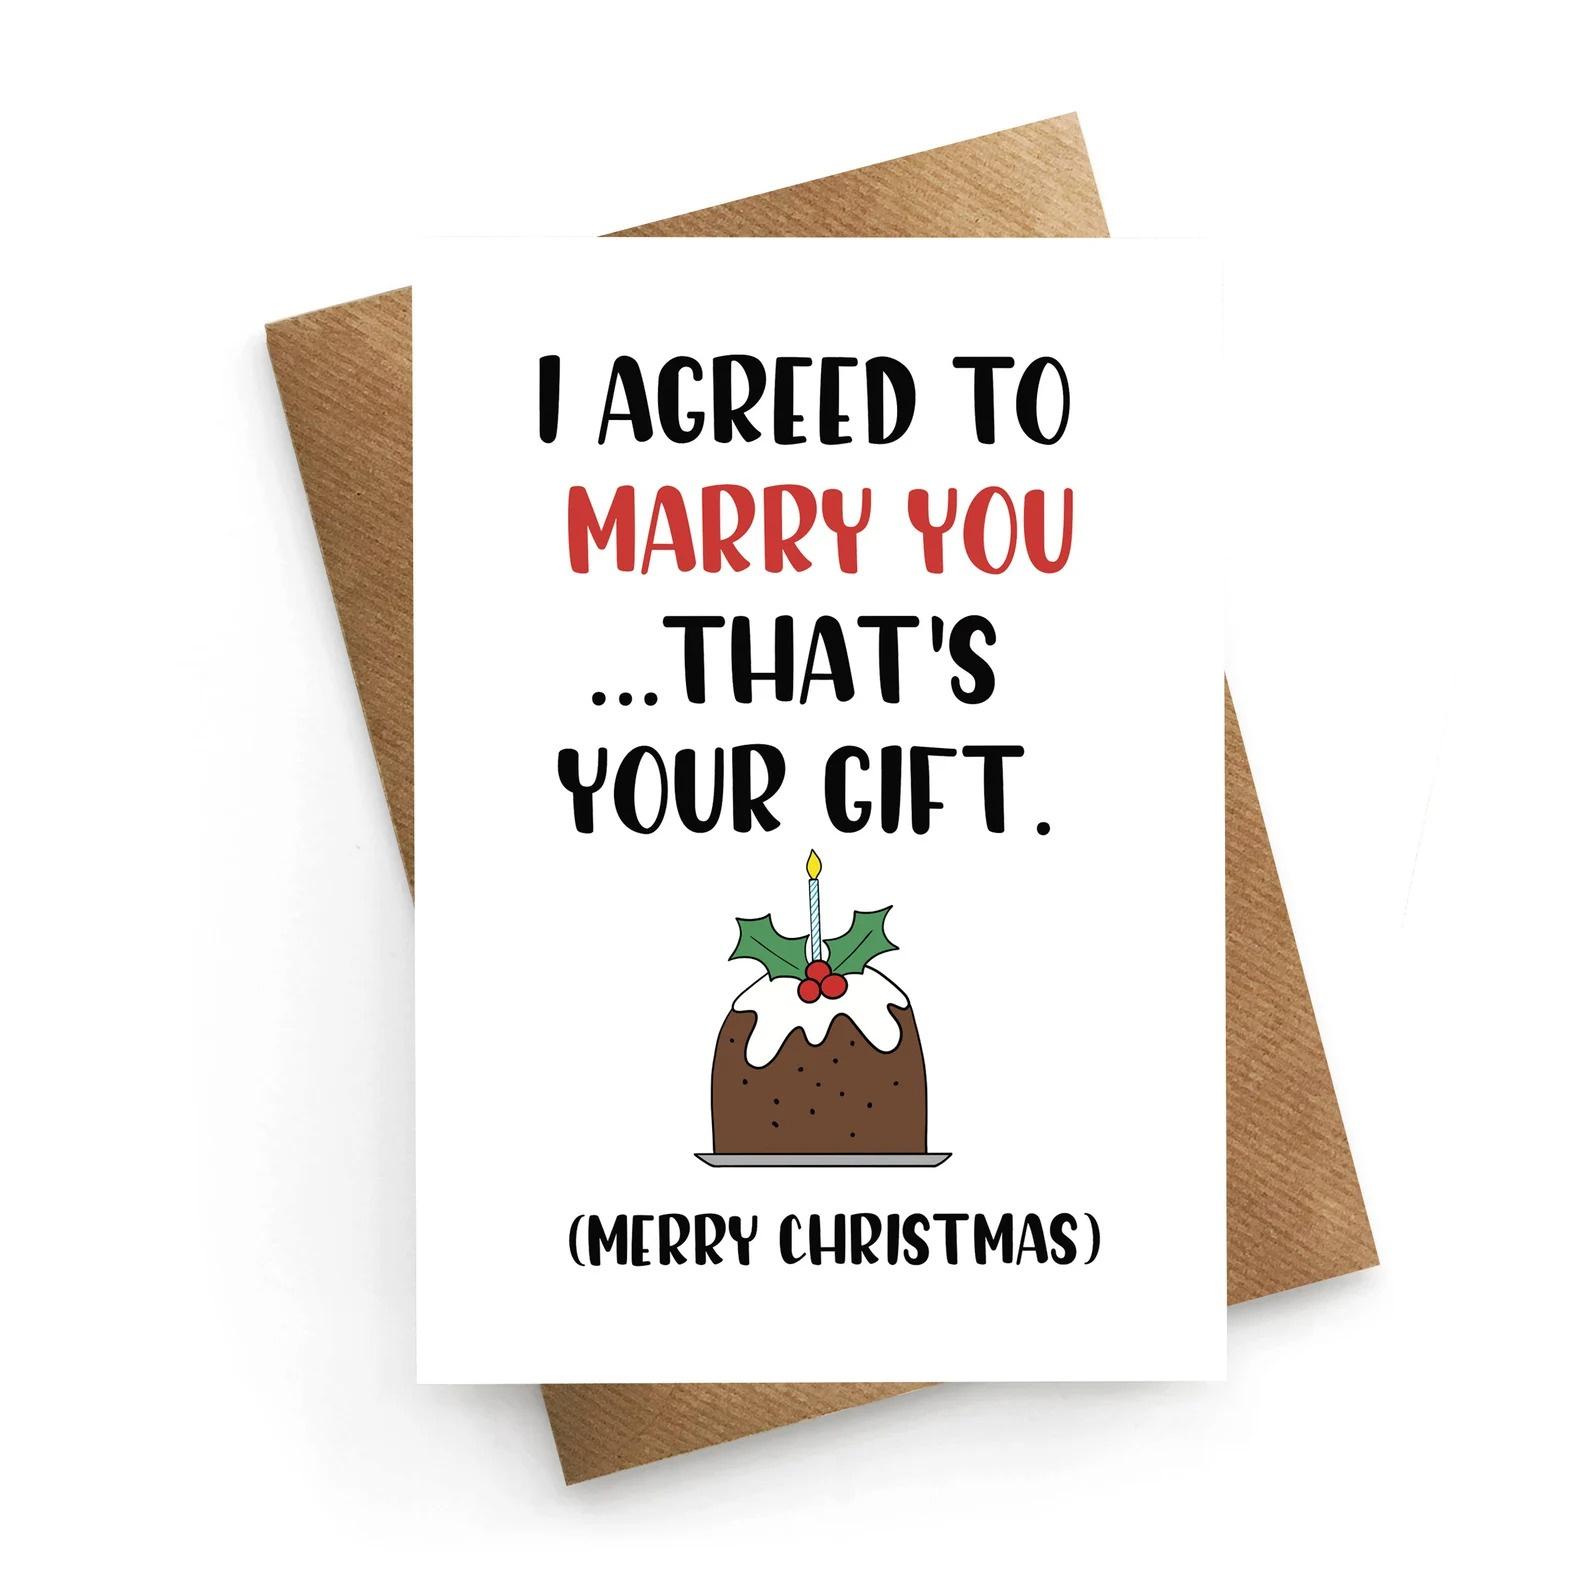 35 of the Best Christmas Cards for Your Fiancé & What to Write ...